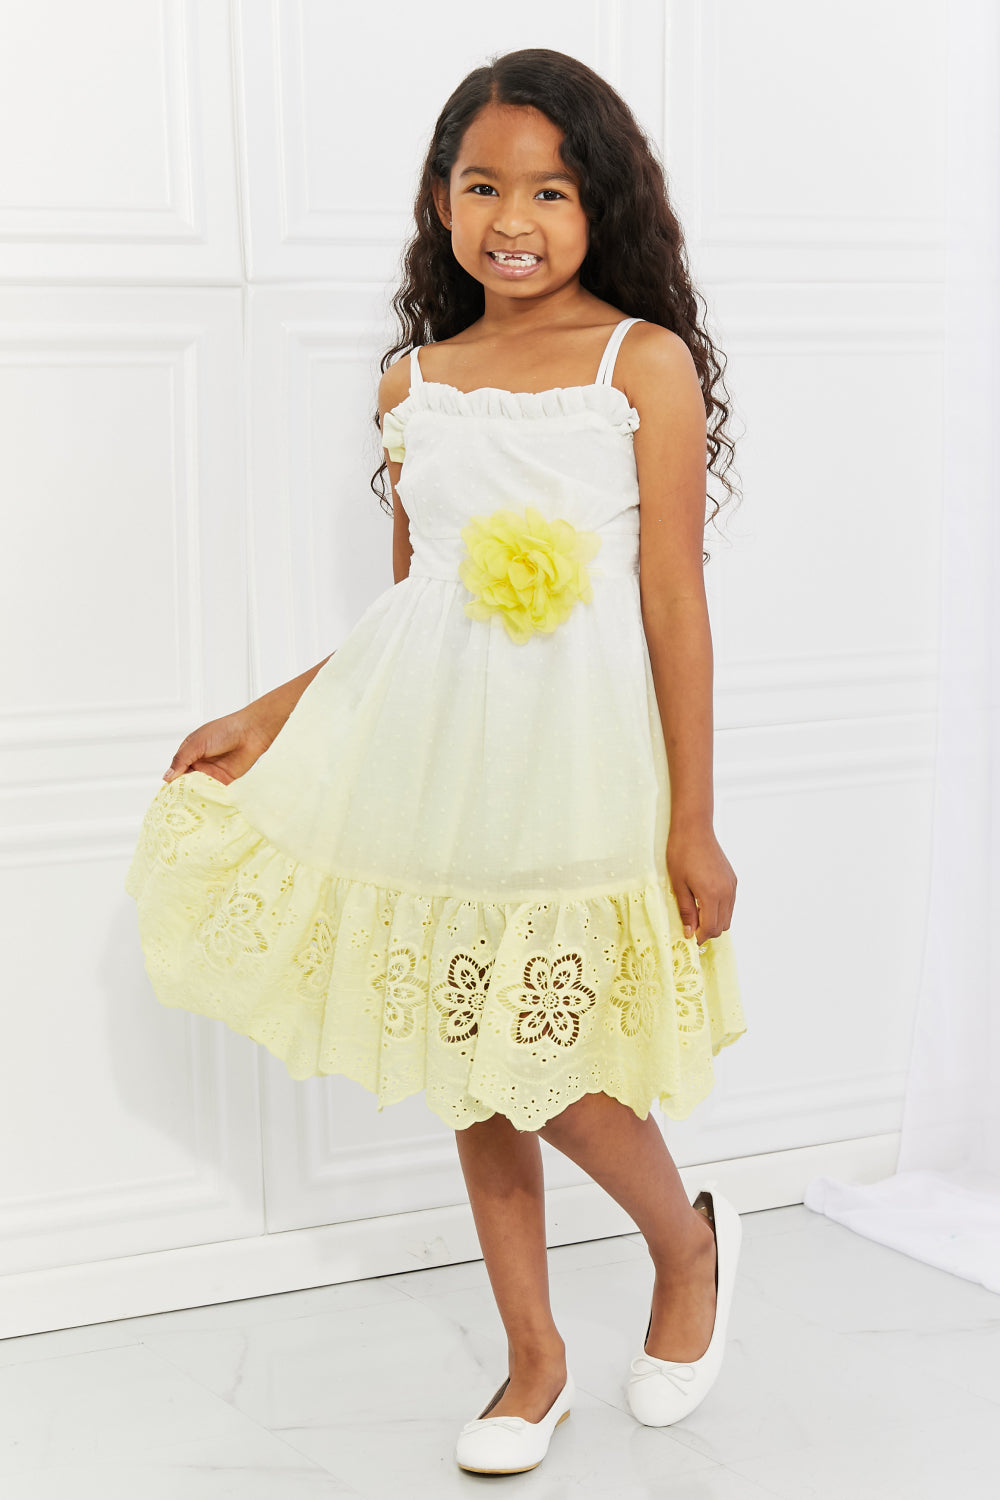 Kid's Dream Play In The Park Flower Dress | - CHANELIA